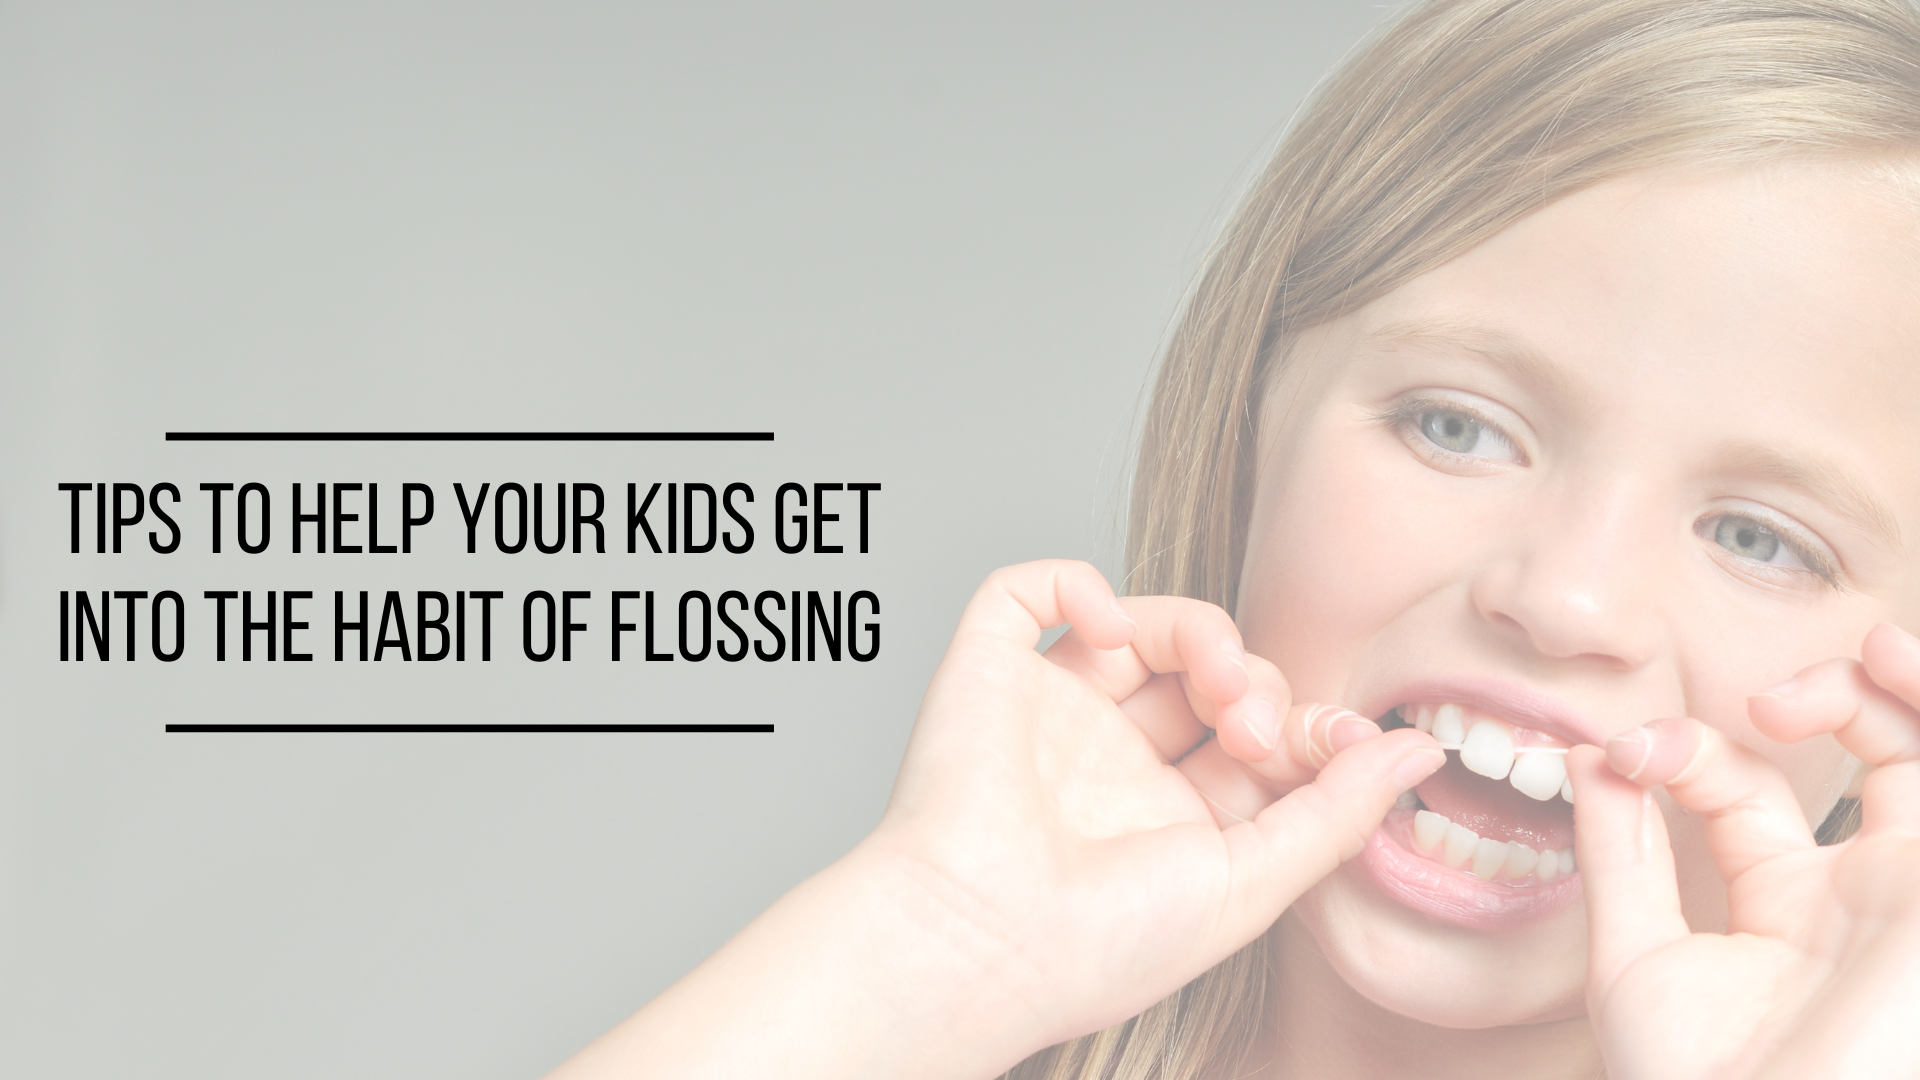 Tips to Help Your Kids Get Into The Habit of Flossing